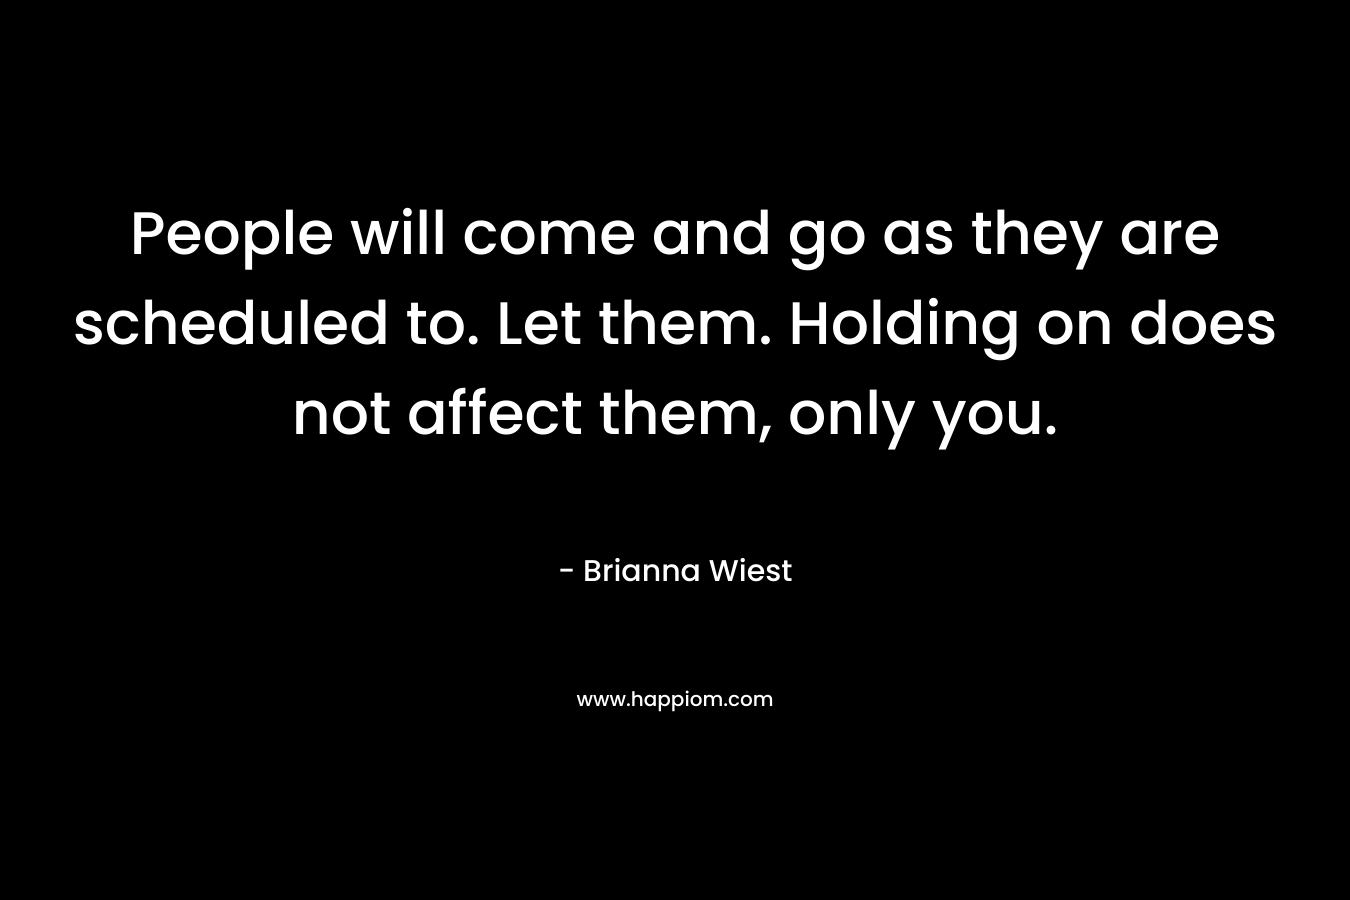 People will come and go as they are scheduled to. Let them. Holding on does not affect them, only you. – Brianna Wiest